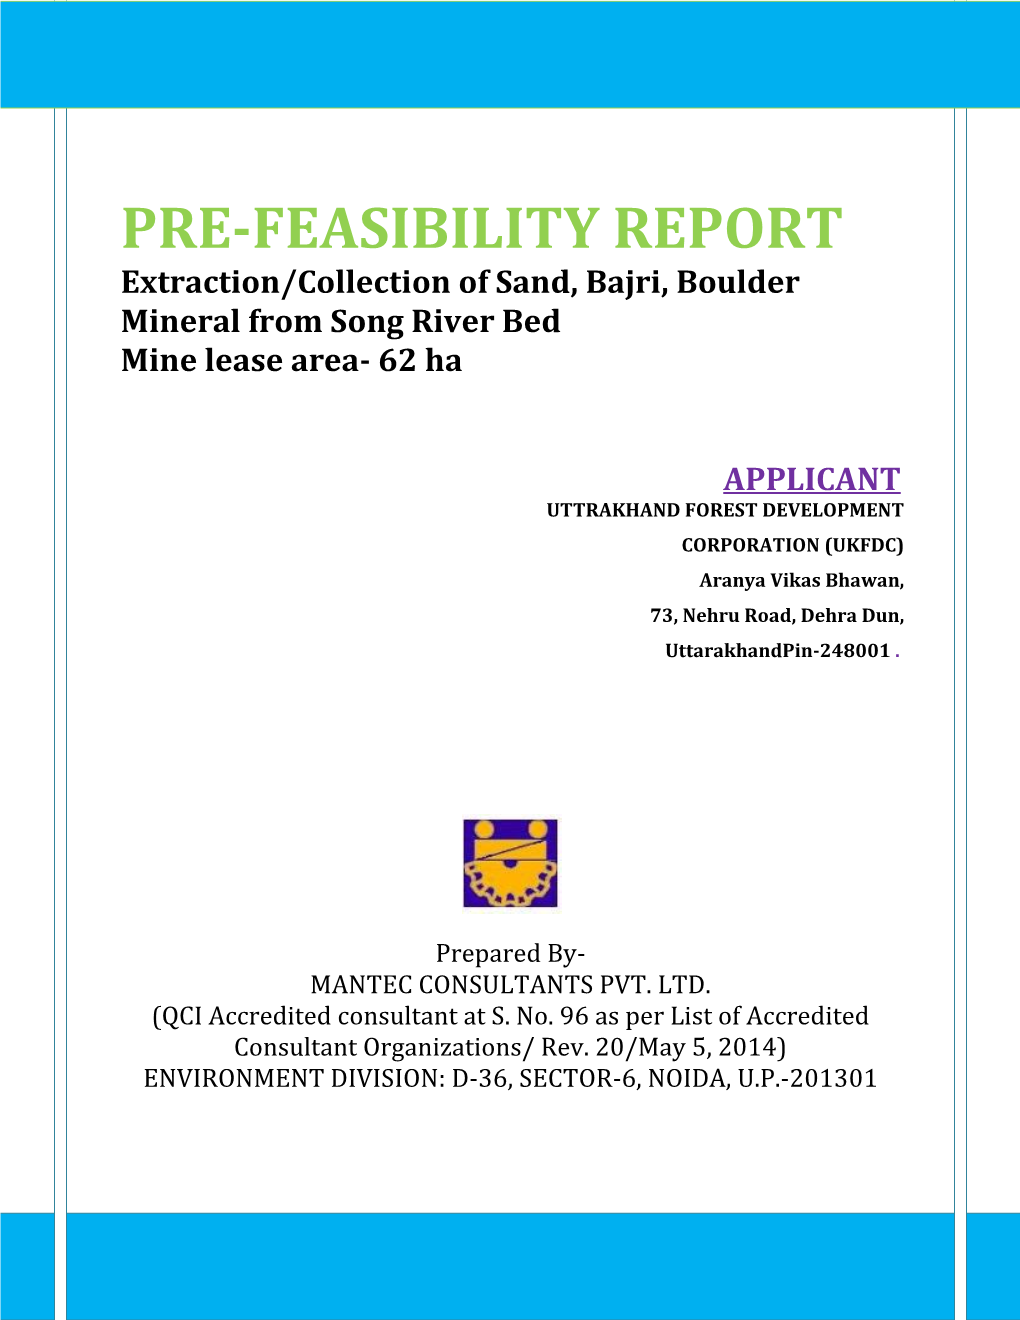 PRE-FEASIBILITY REPORT Extraction/Collection of Sand, Bajri, Boulder Mineral from Song River Bed Mine Lease Area- 62 Ha